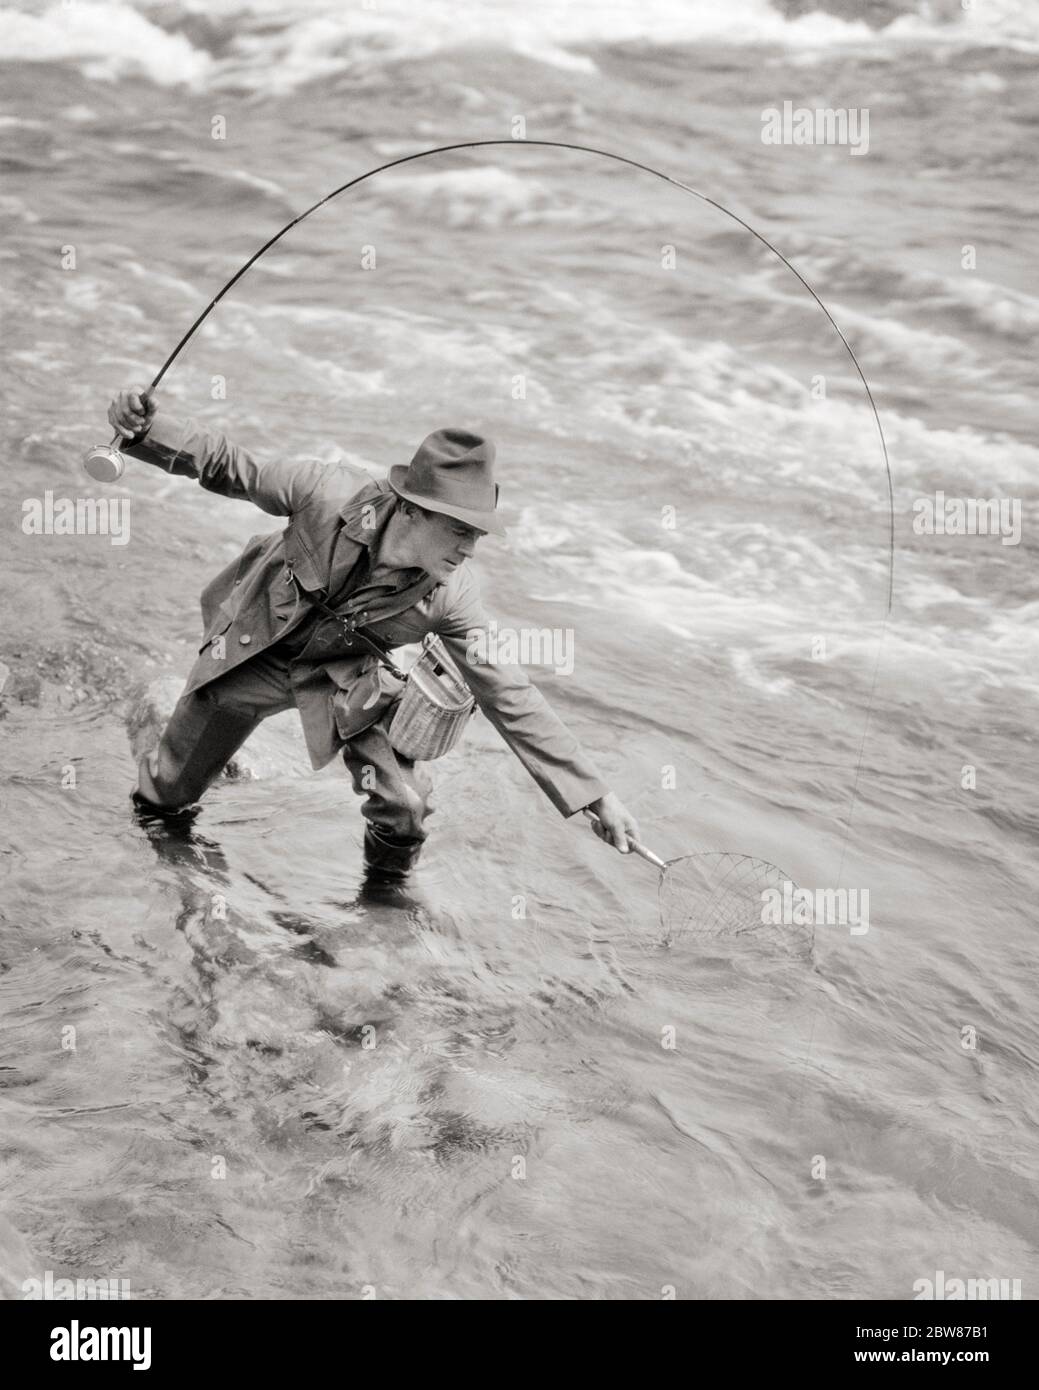 1920s MAN FISHERMAN STANDING IN STREAM BENDING OVER WITH NET TO